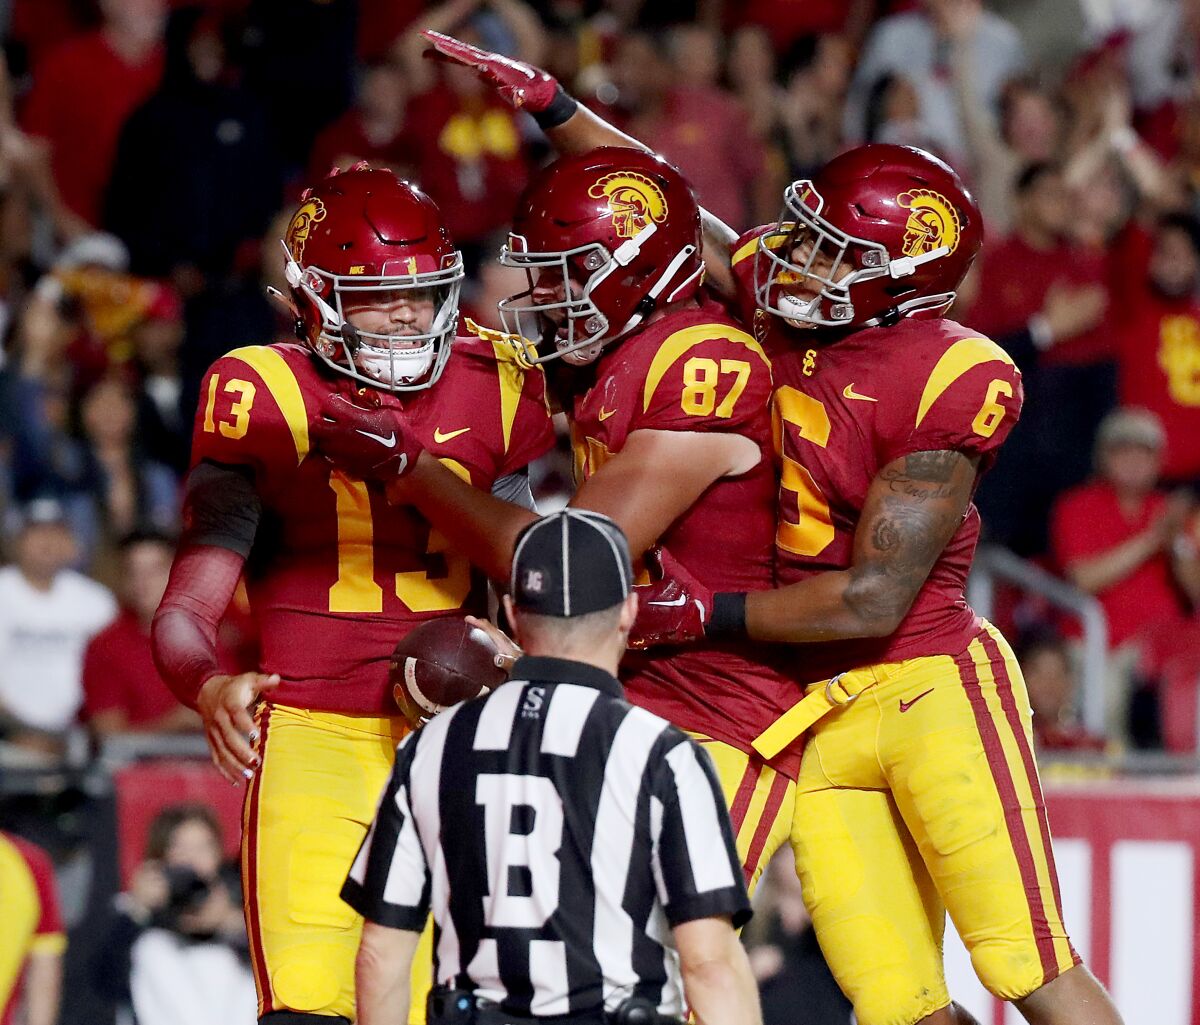 USC quarterback Caleb Williams is congratulated by teammates after scoring a touchdown.